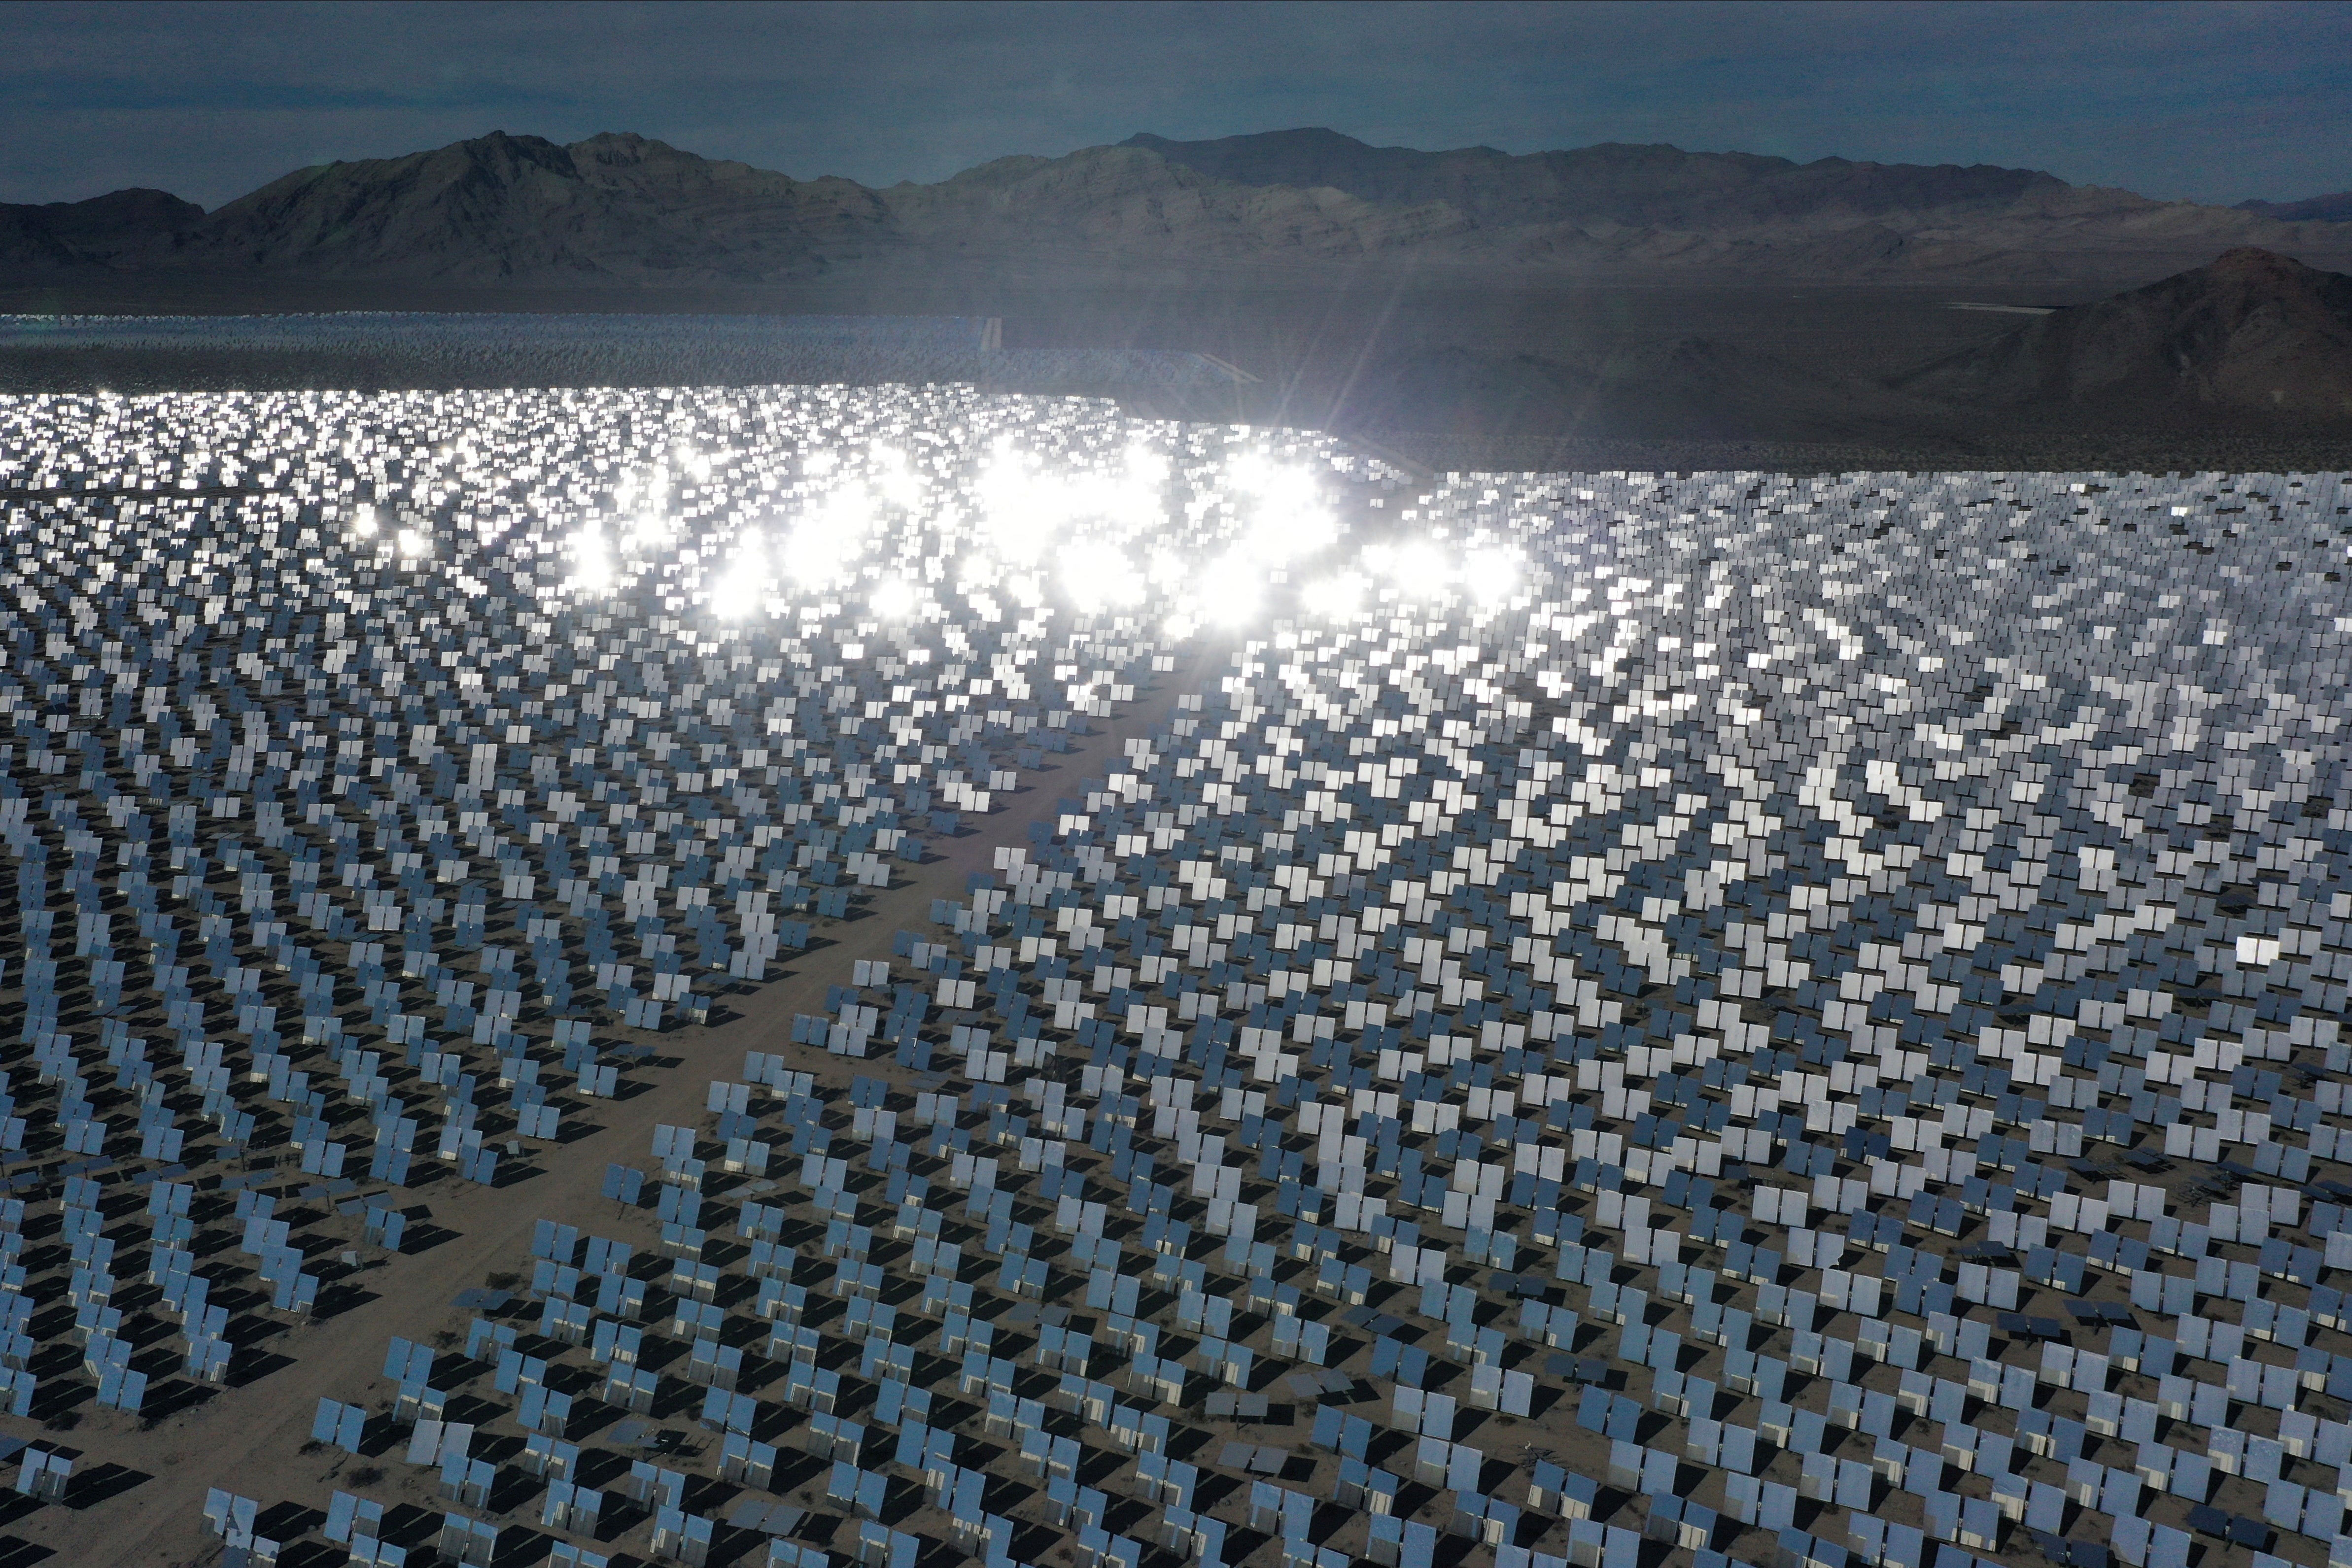 Ivanpah Solar Electric Generating System, the world’s largest solar thermal power station, in the Mojave Desert near Nipton, California on February 27, 2022